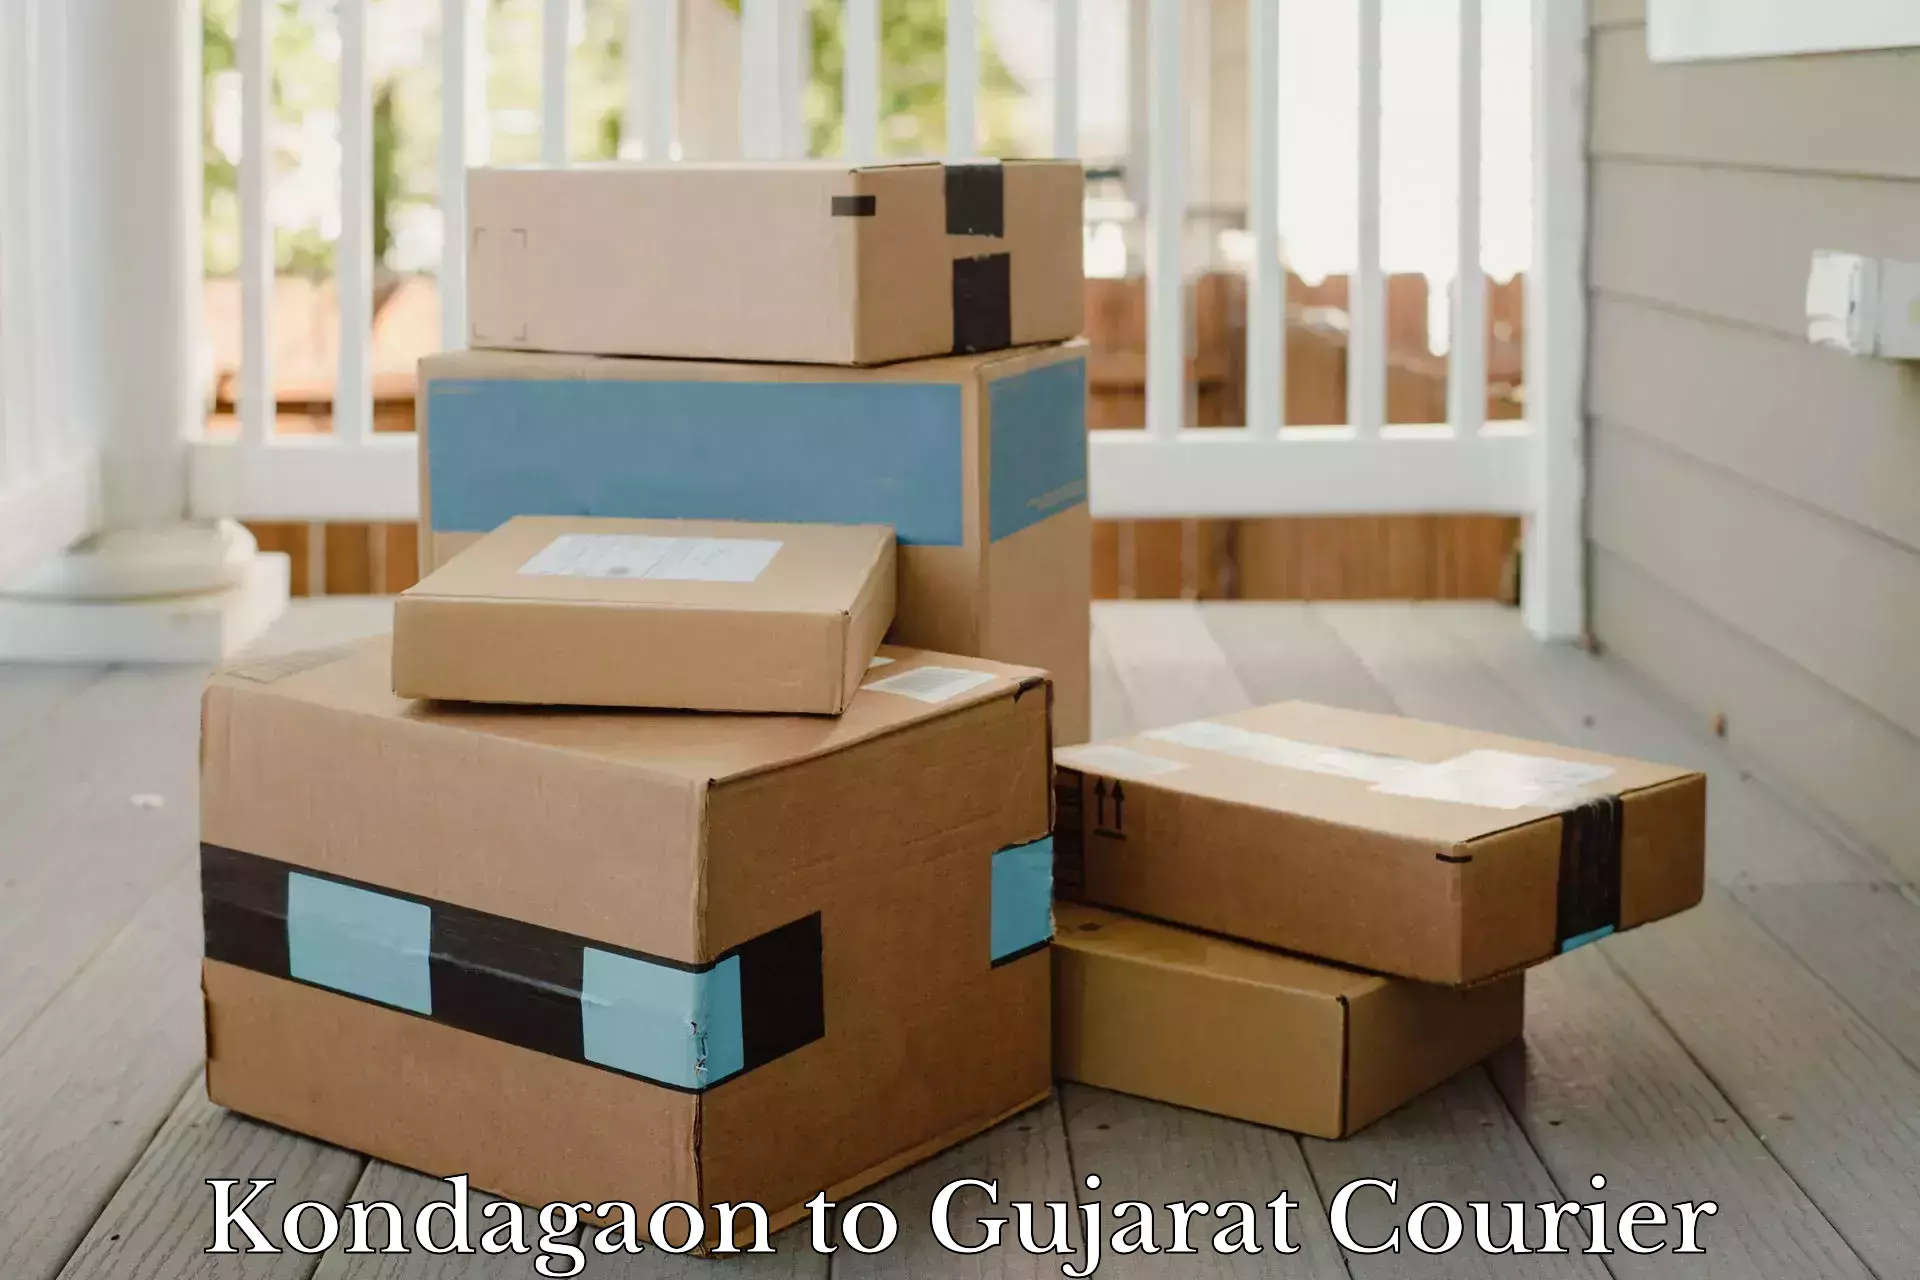 On-call courier service Kondagaon to Ahmedabad